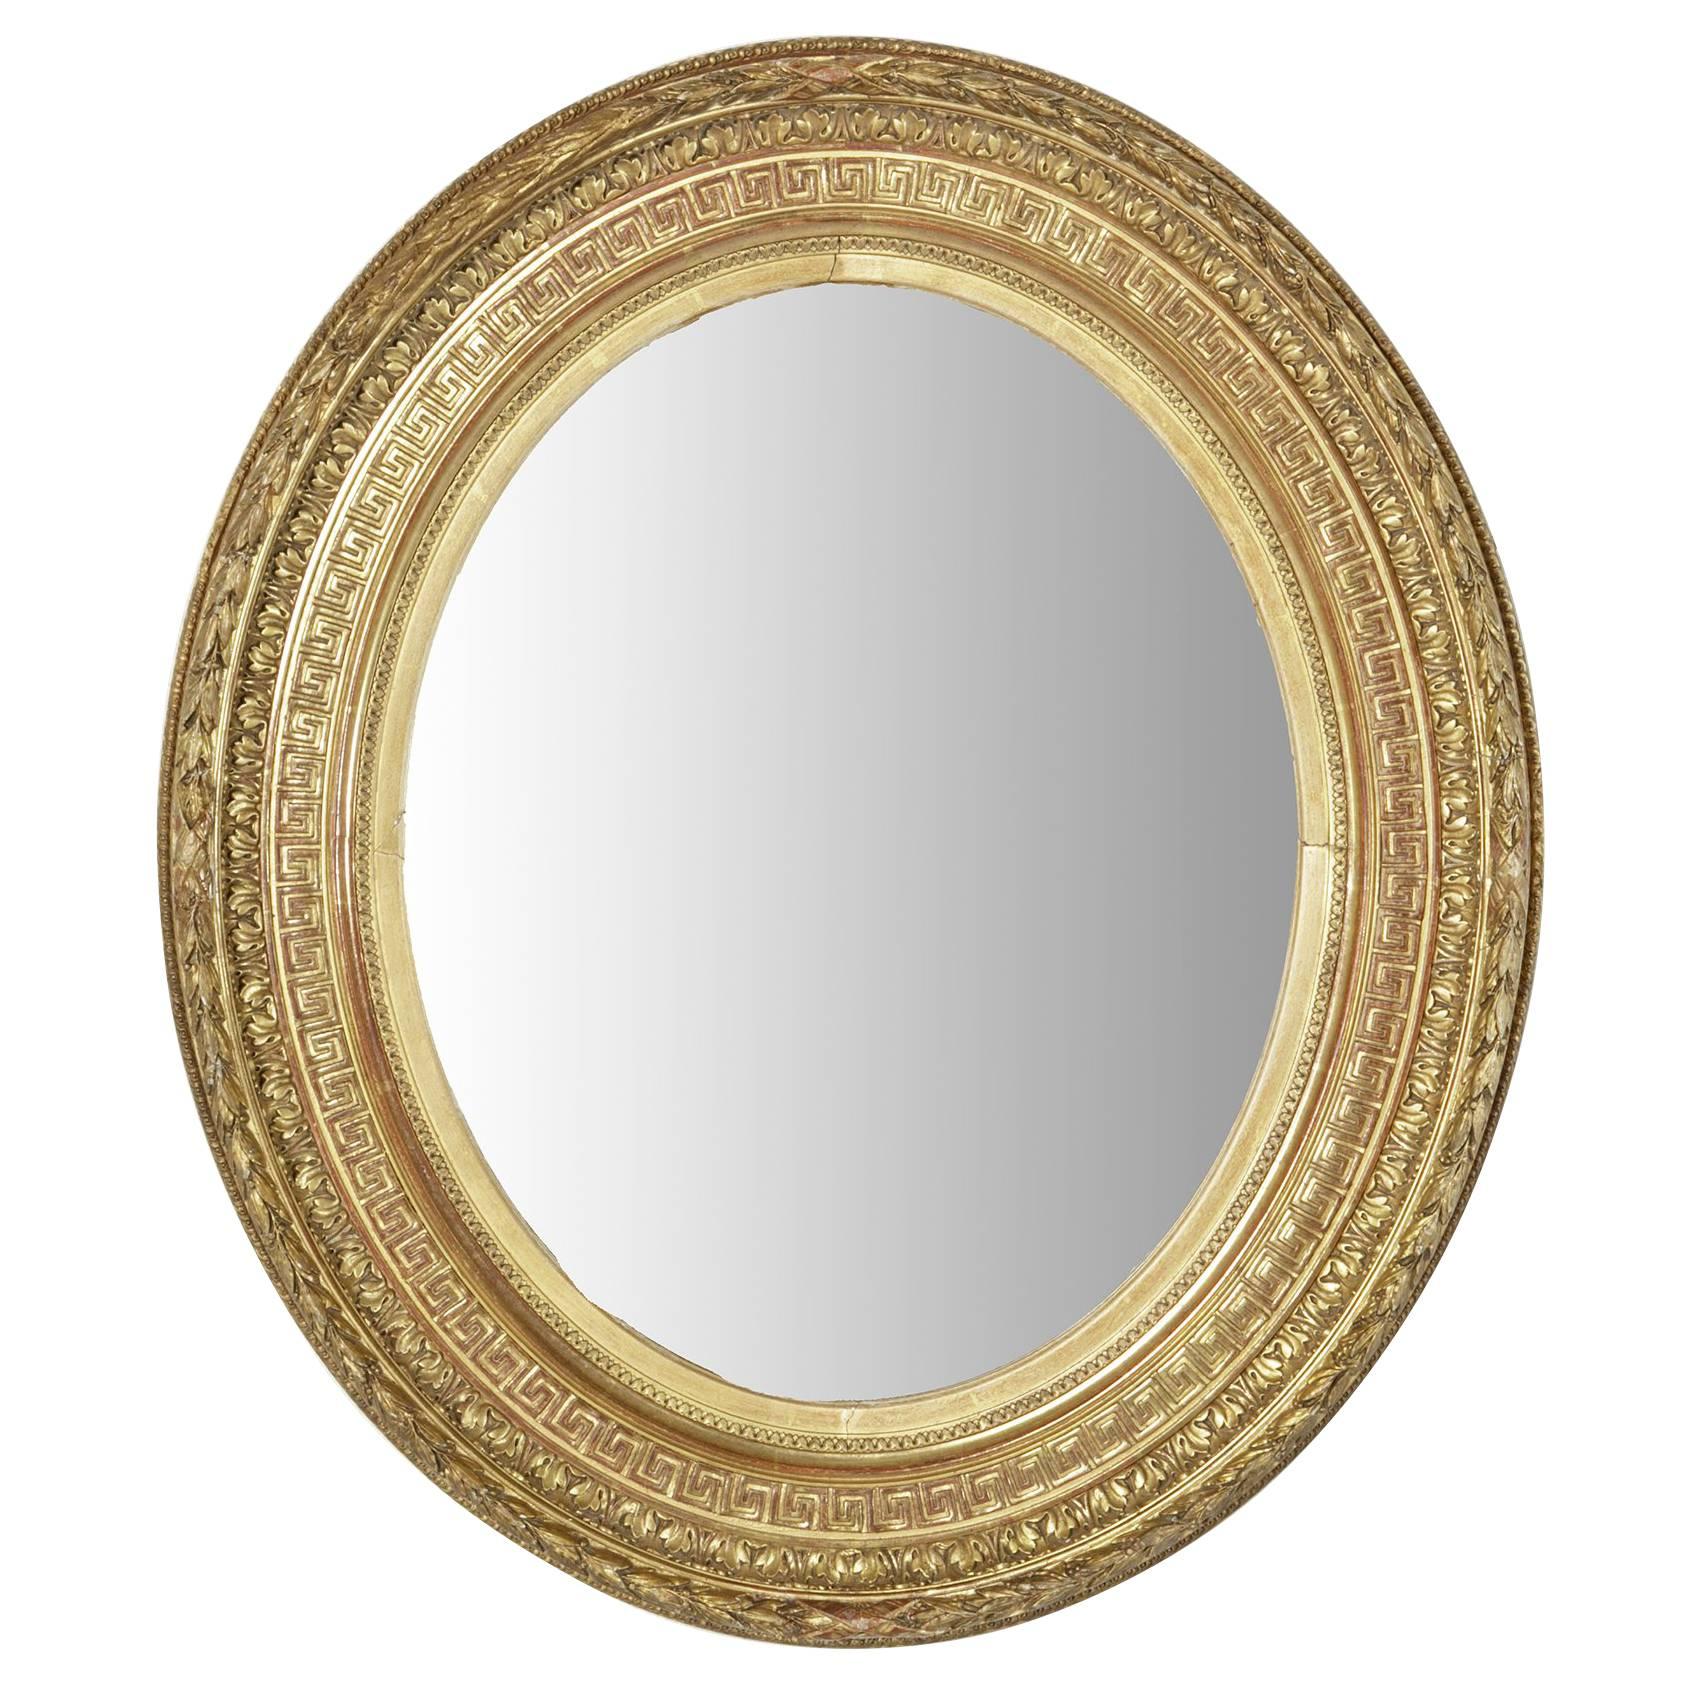 Small-Scale 19th Century Giltwood Oval Mirror with Greek Key